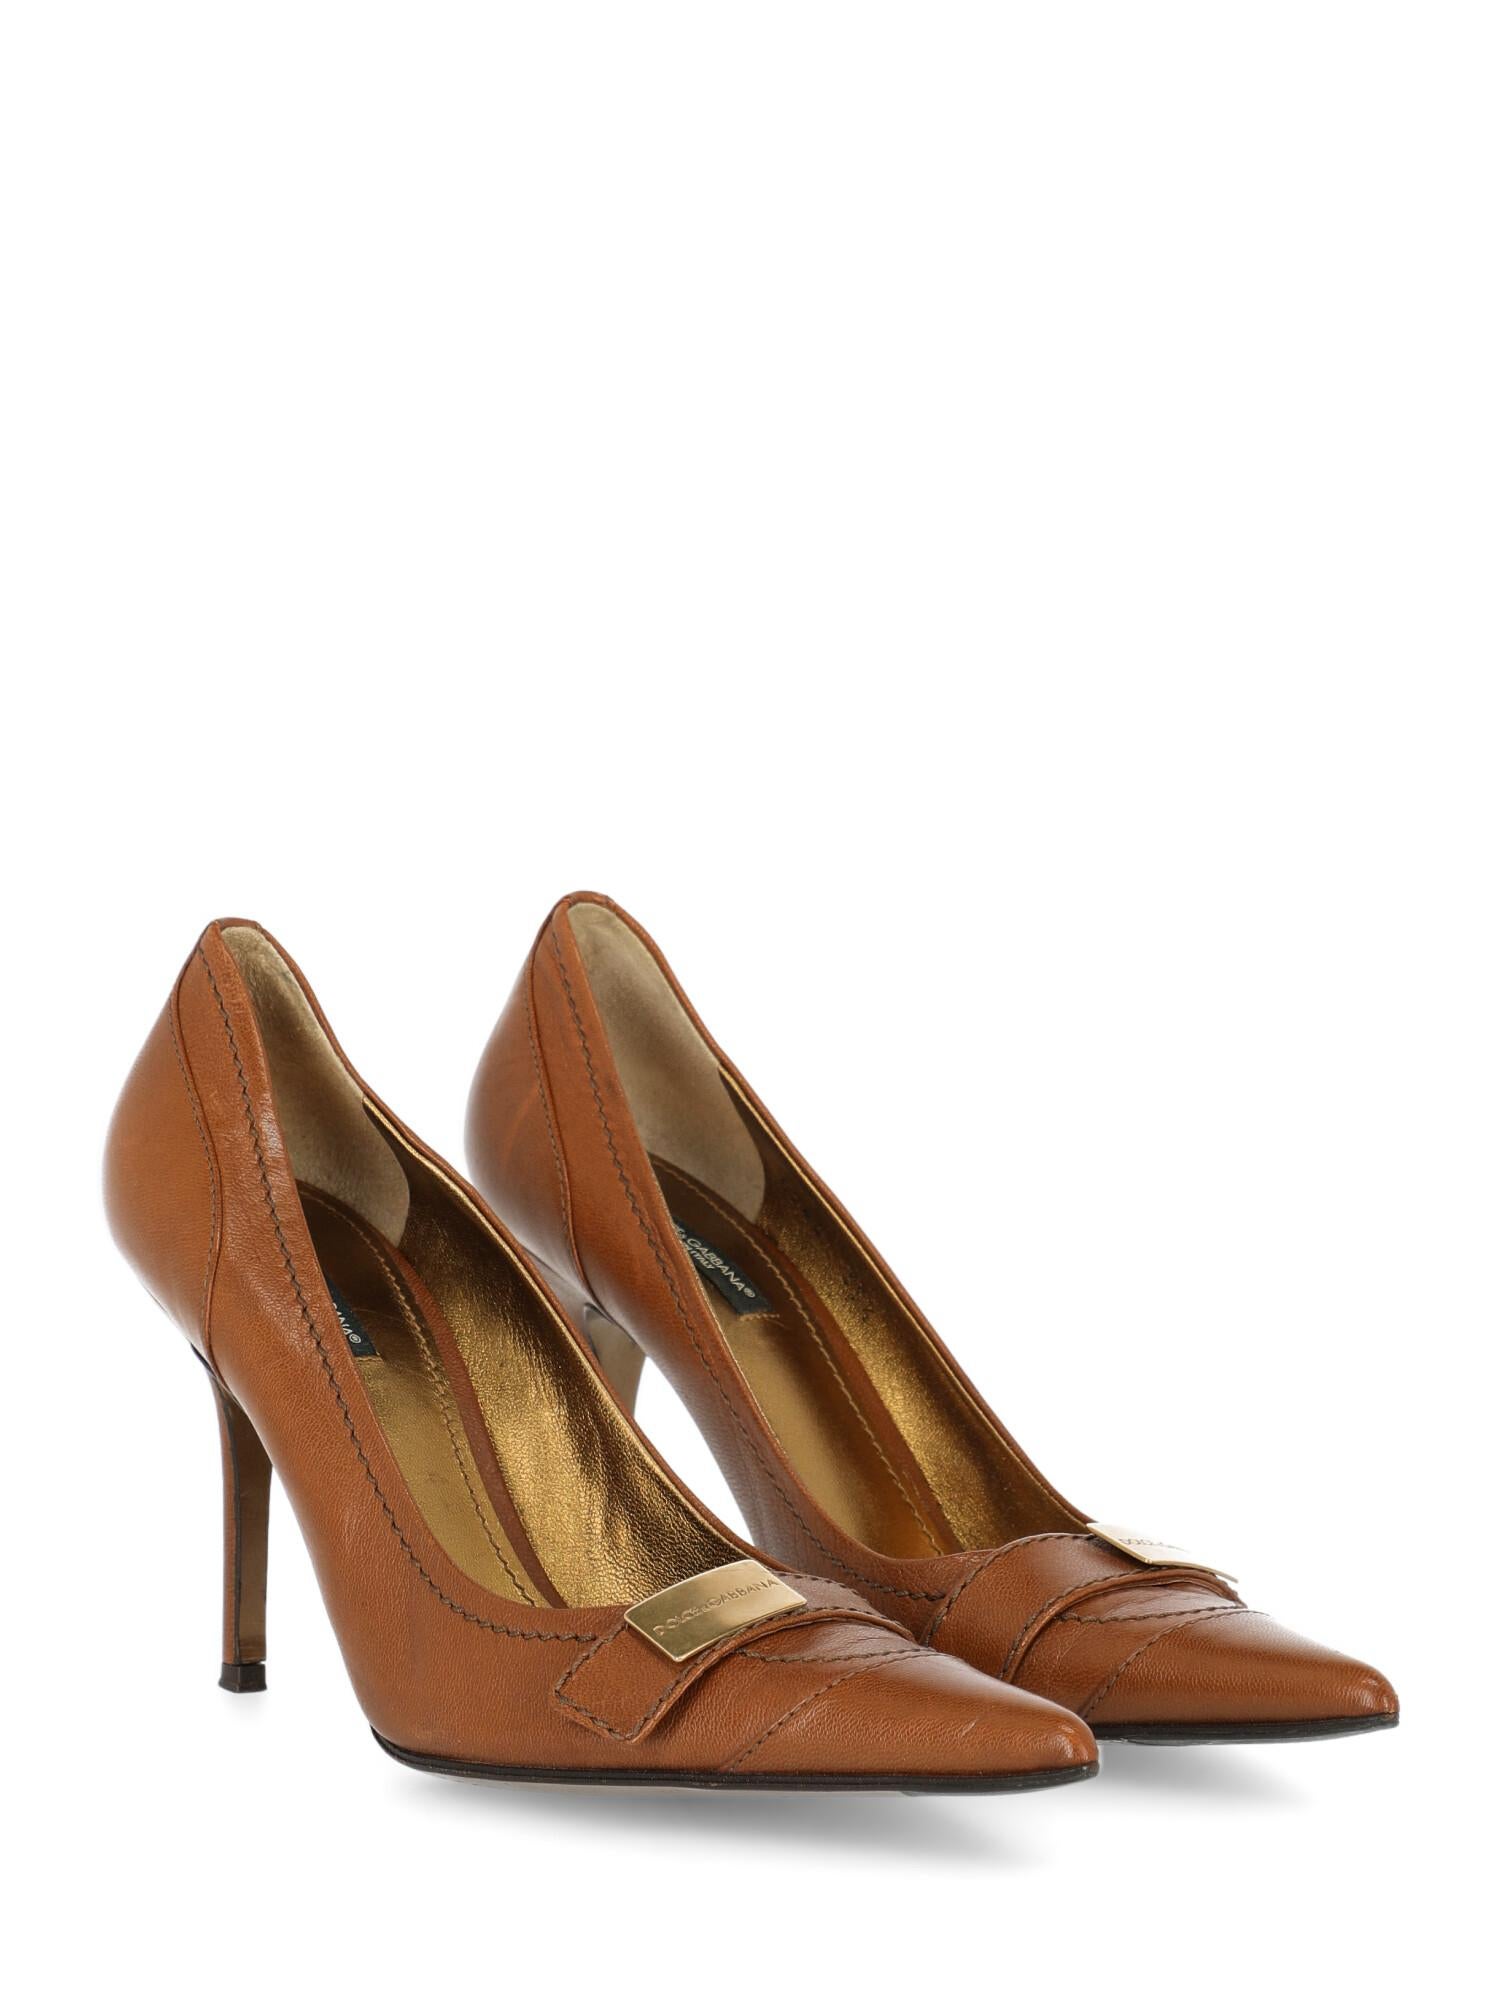 Shoe, leather, solid color, logo placard, pointed toe, leather insole, tapered heel, high heel

Includes: N/A

Product Condition: Good
Heel: prominent scratches, slightly visible marks. Sole: visible signs of use. Upper: negligible wrinkle, visible